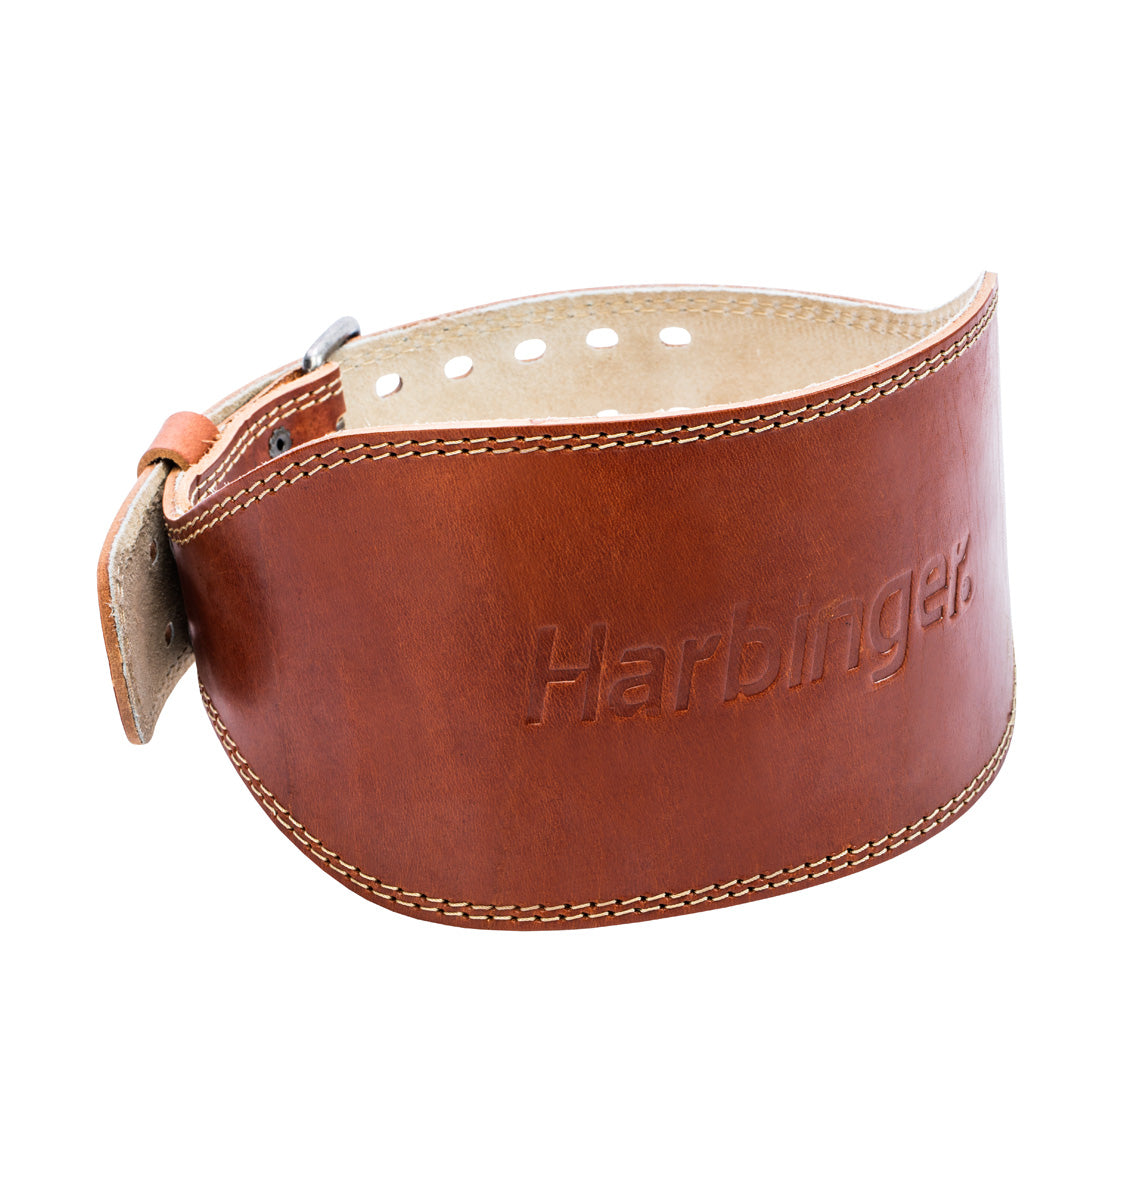 Harbinger 6 inch Oiled Leather Weight Lifting Belt - 1